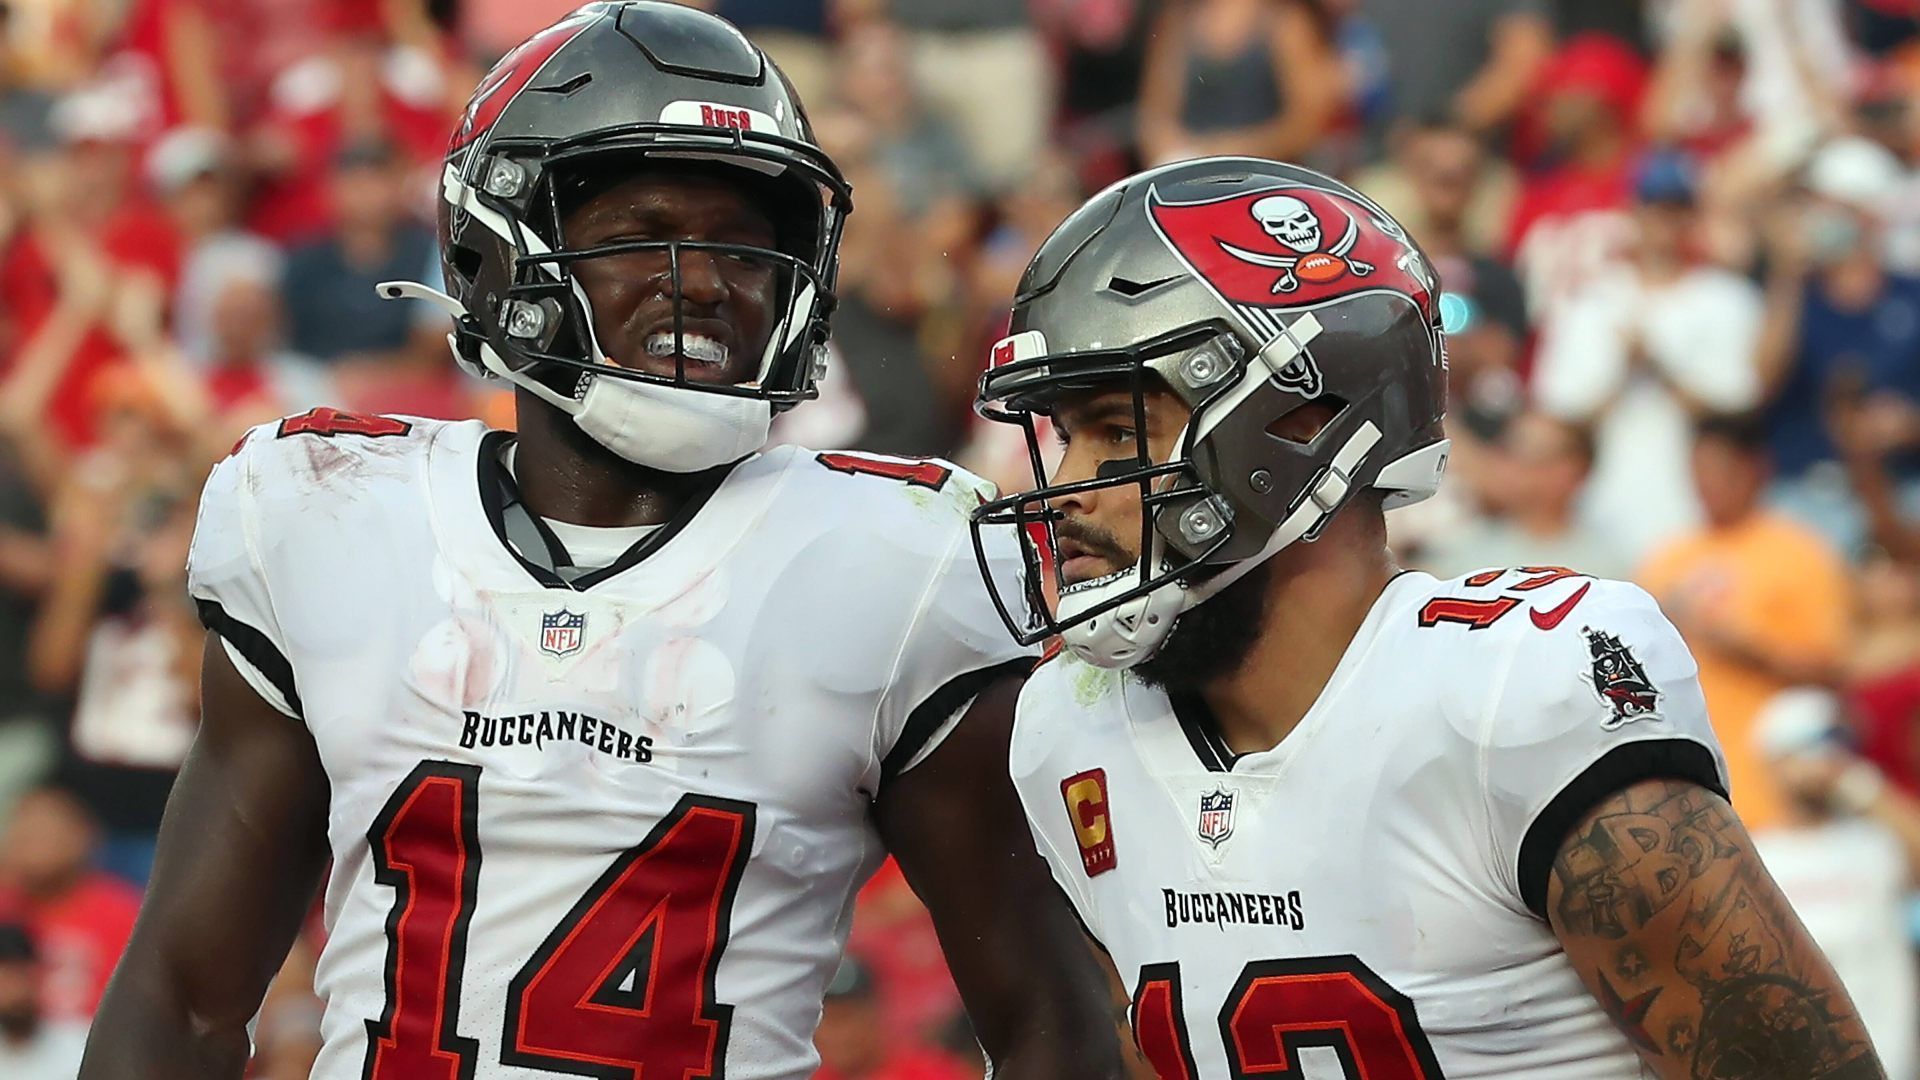 
                <strong>Passing Offense: Tampa Bay Buccaneers </strong><br>
                &#x2022; <strong>Punkte im Schnitt: 30,5</strong> - <br>&#x2022; Yards pro Spiel: 327,5 - <br>&#x2022; Touchdowns: 25 - <br>&#x2022; Fumbles: 4 -<br>
              